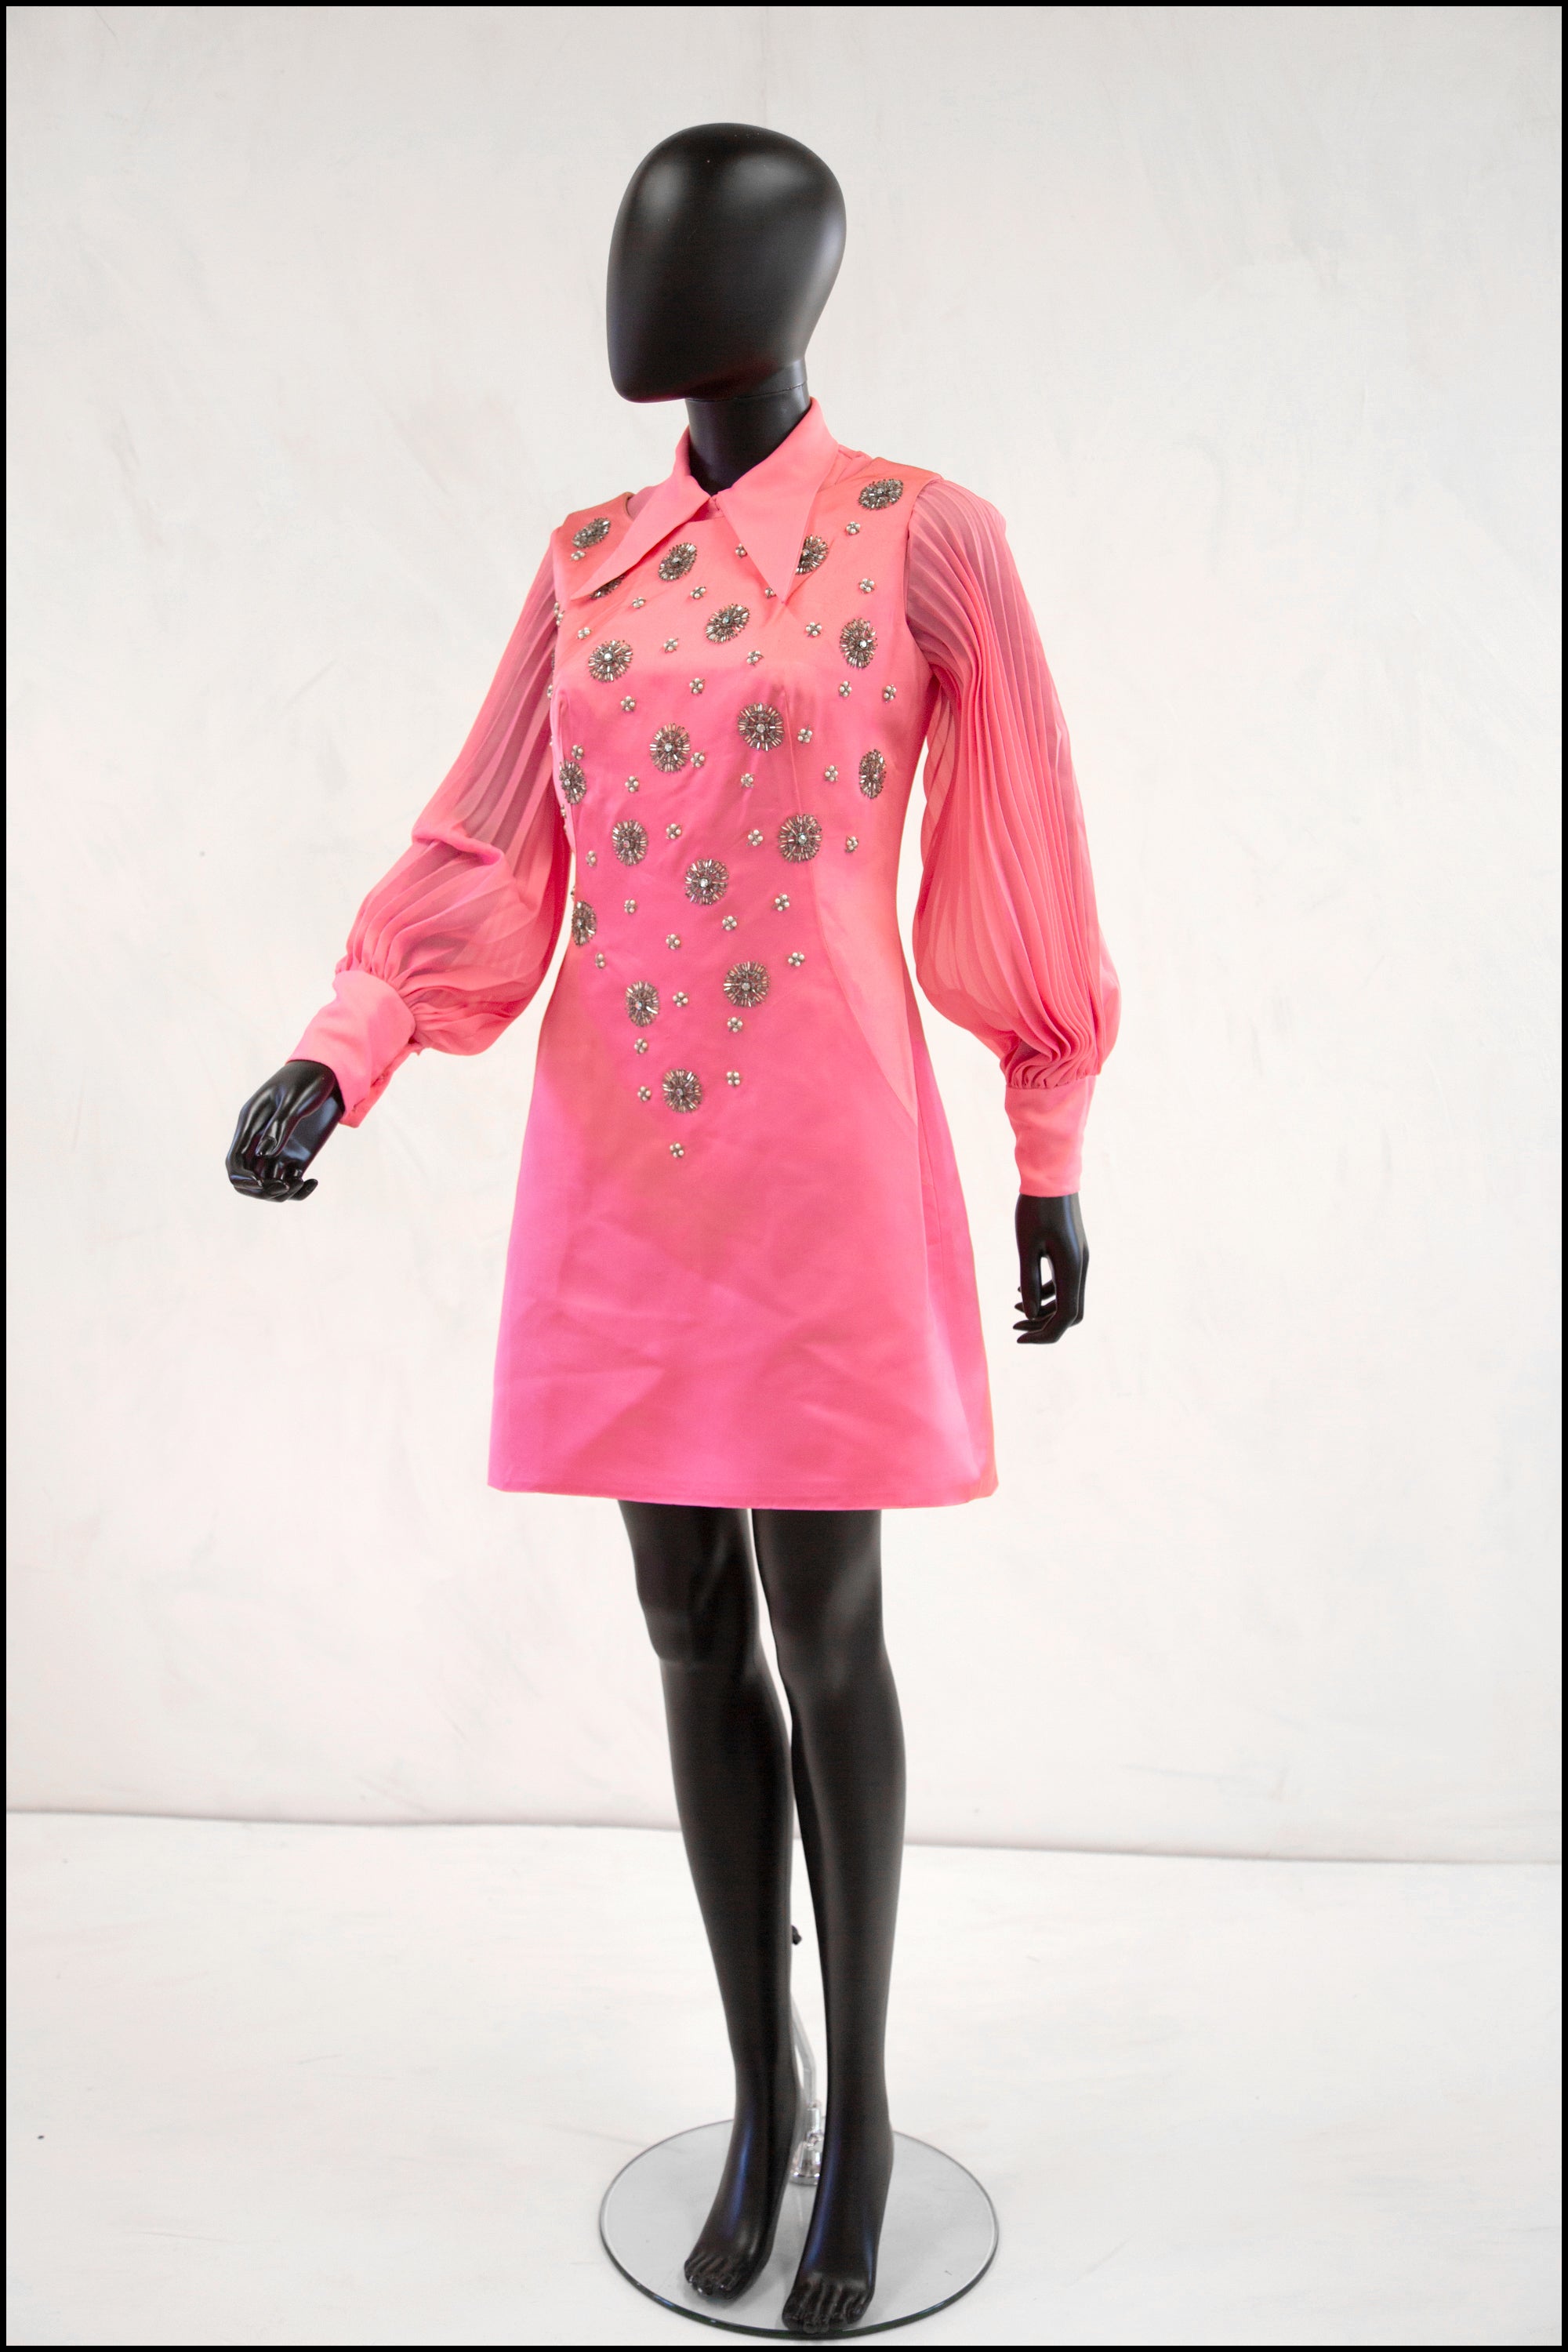 Where could I find 60s inspired mini dresses like the pink one